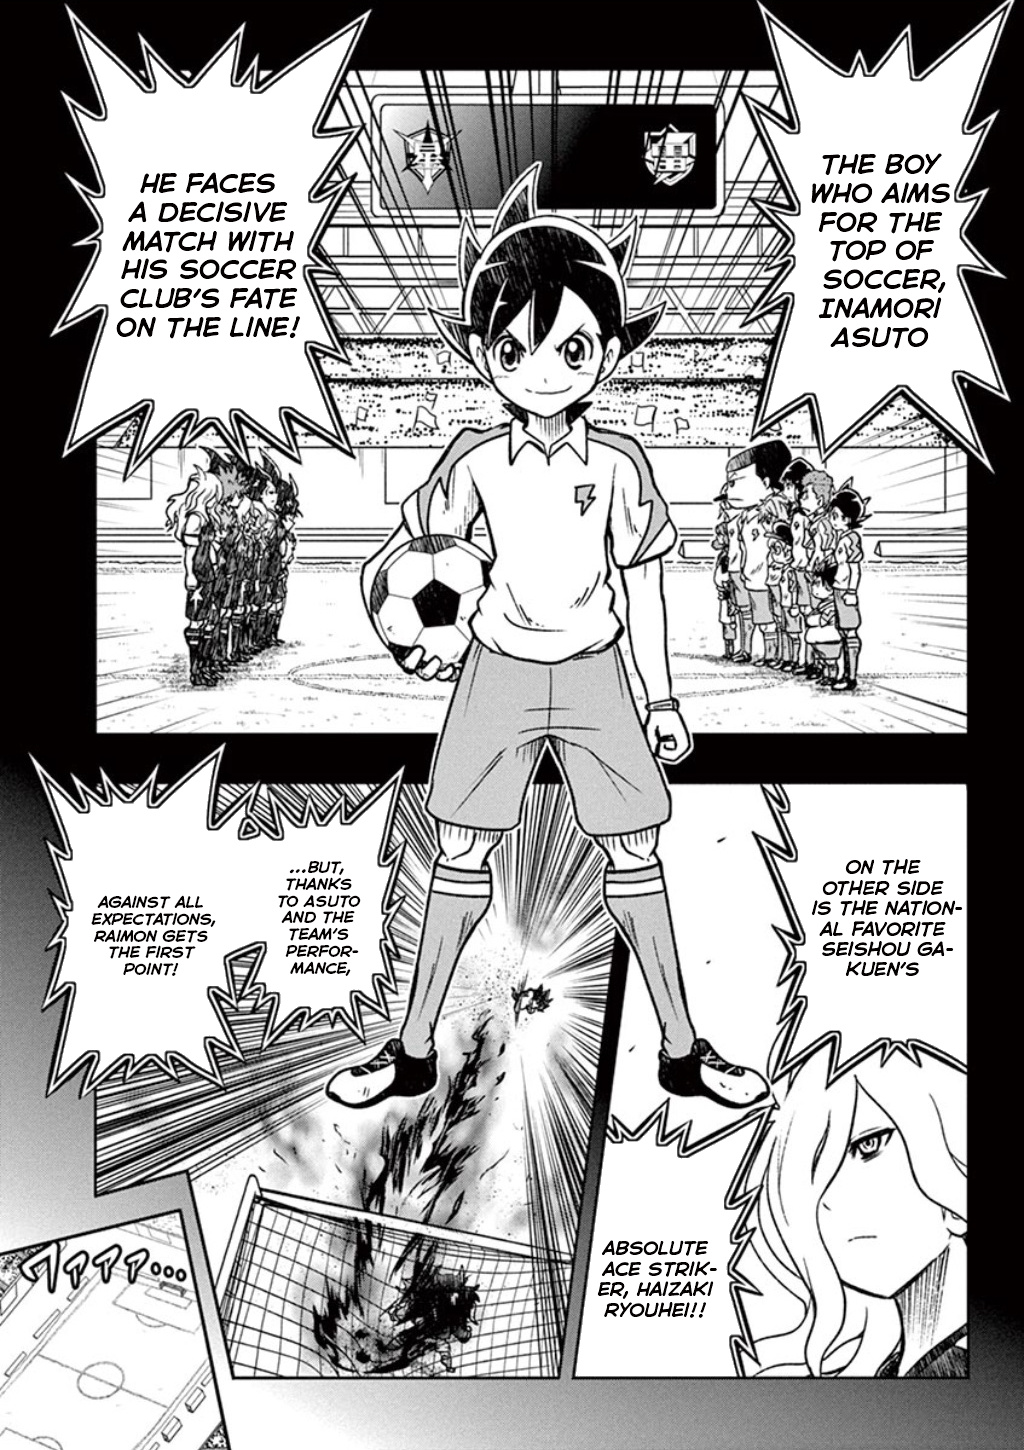 Inazuma Eleven: Ares No Tenbin Vol.1 Chapter 2: A Decisive Battle With The Fate Of The Club On The Line! - Picture 2